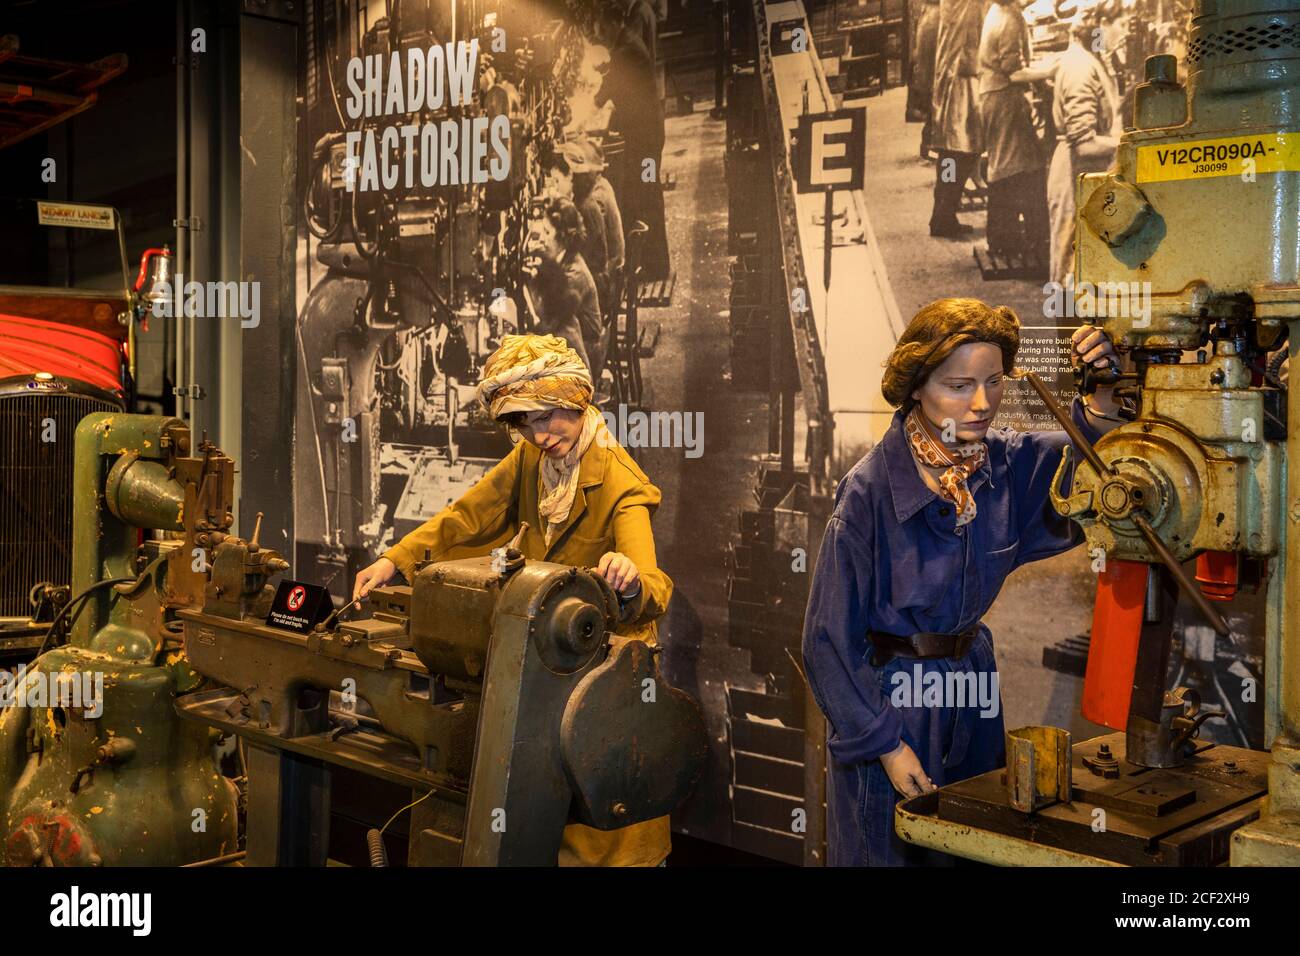 UK, England, Coventry, Transport Museum, WW2 women factory workers display Stock Photo